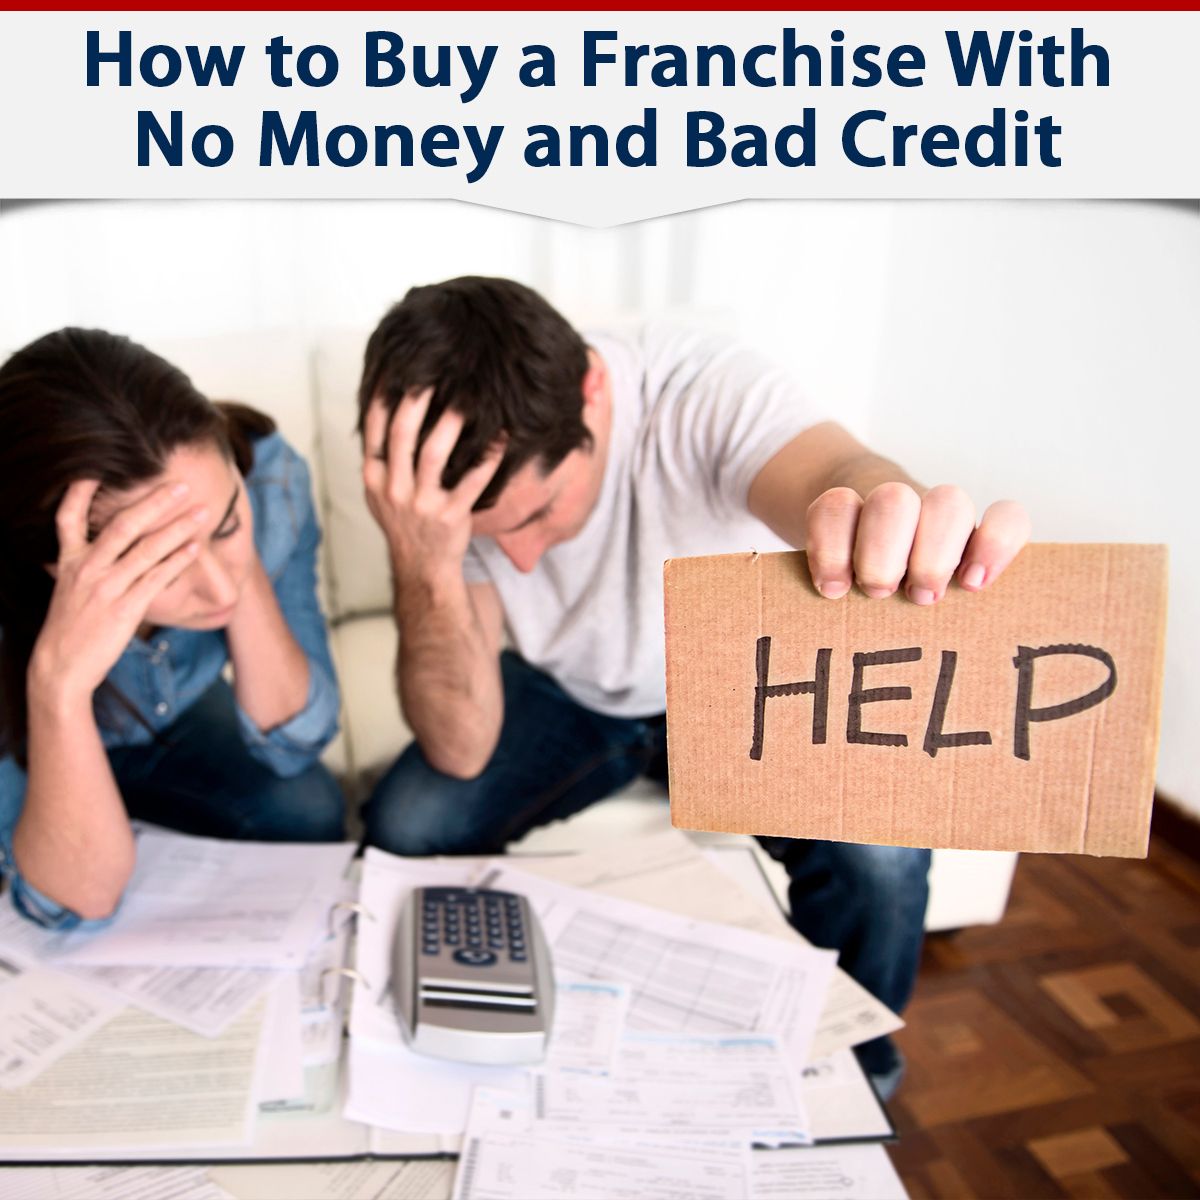 How to Buy a Franchise With No Money and Bad Credit